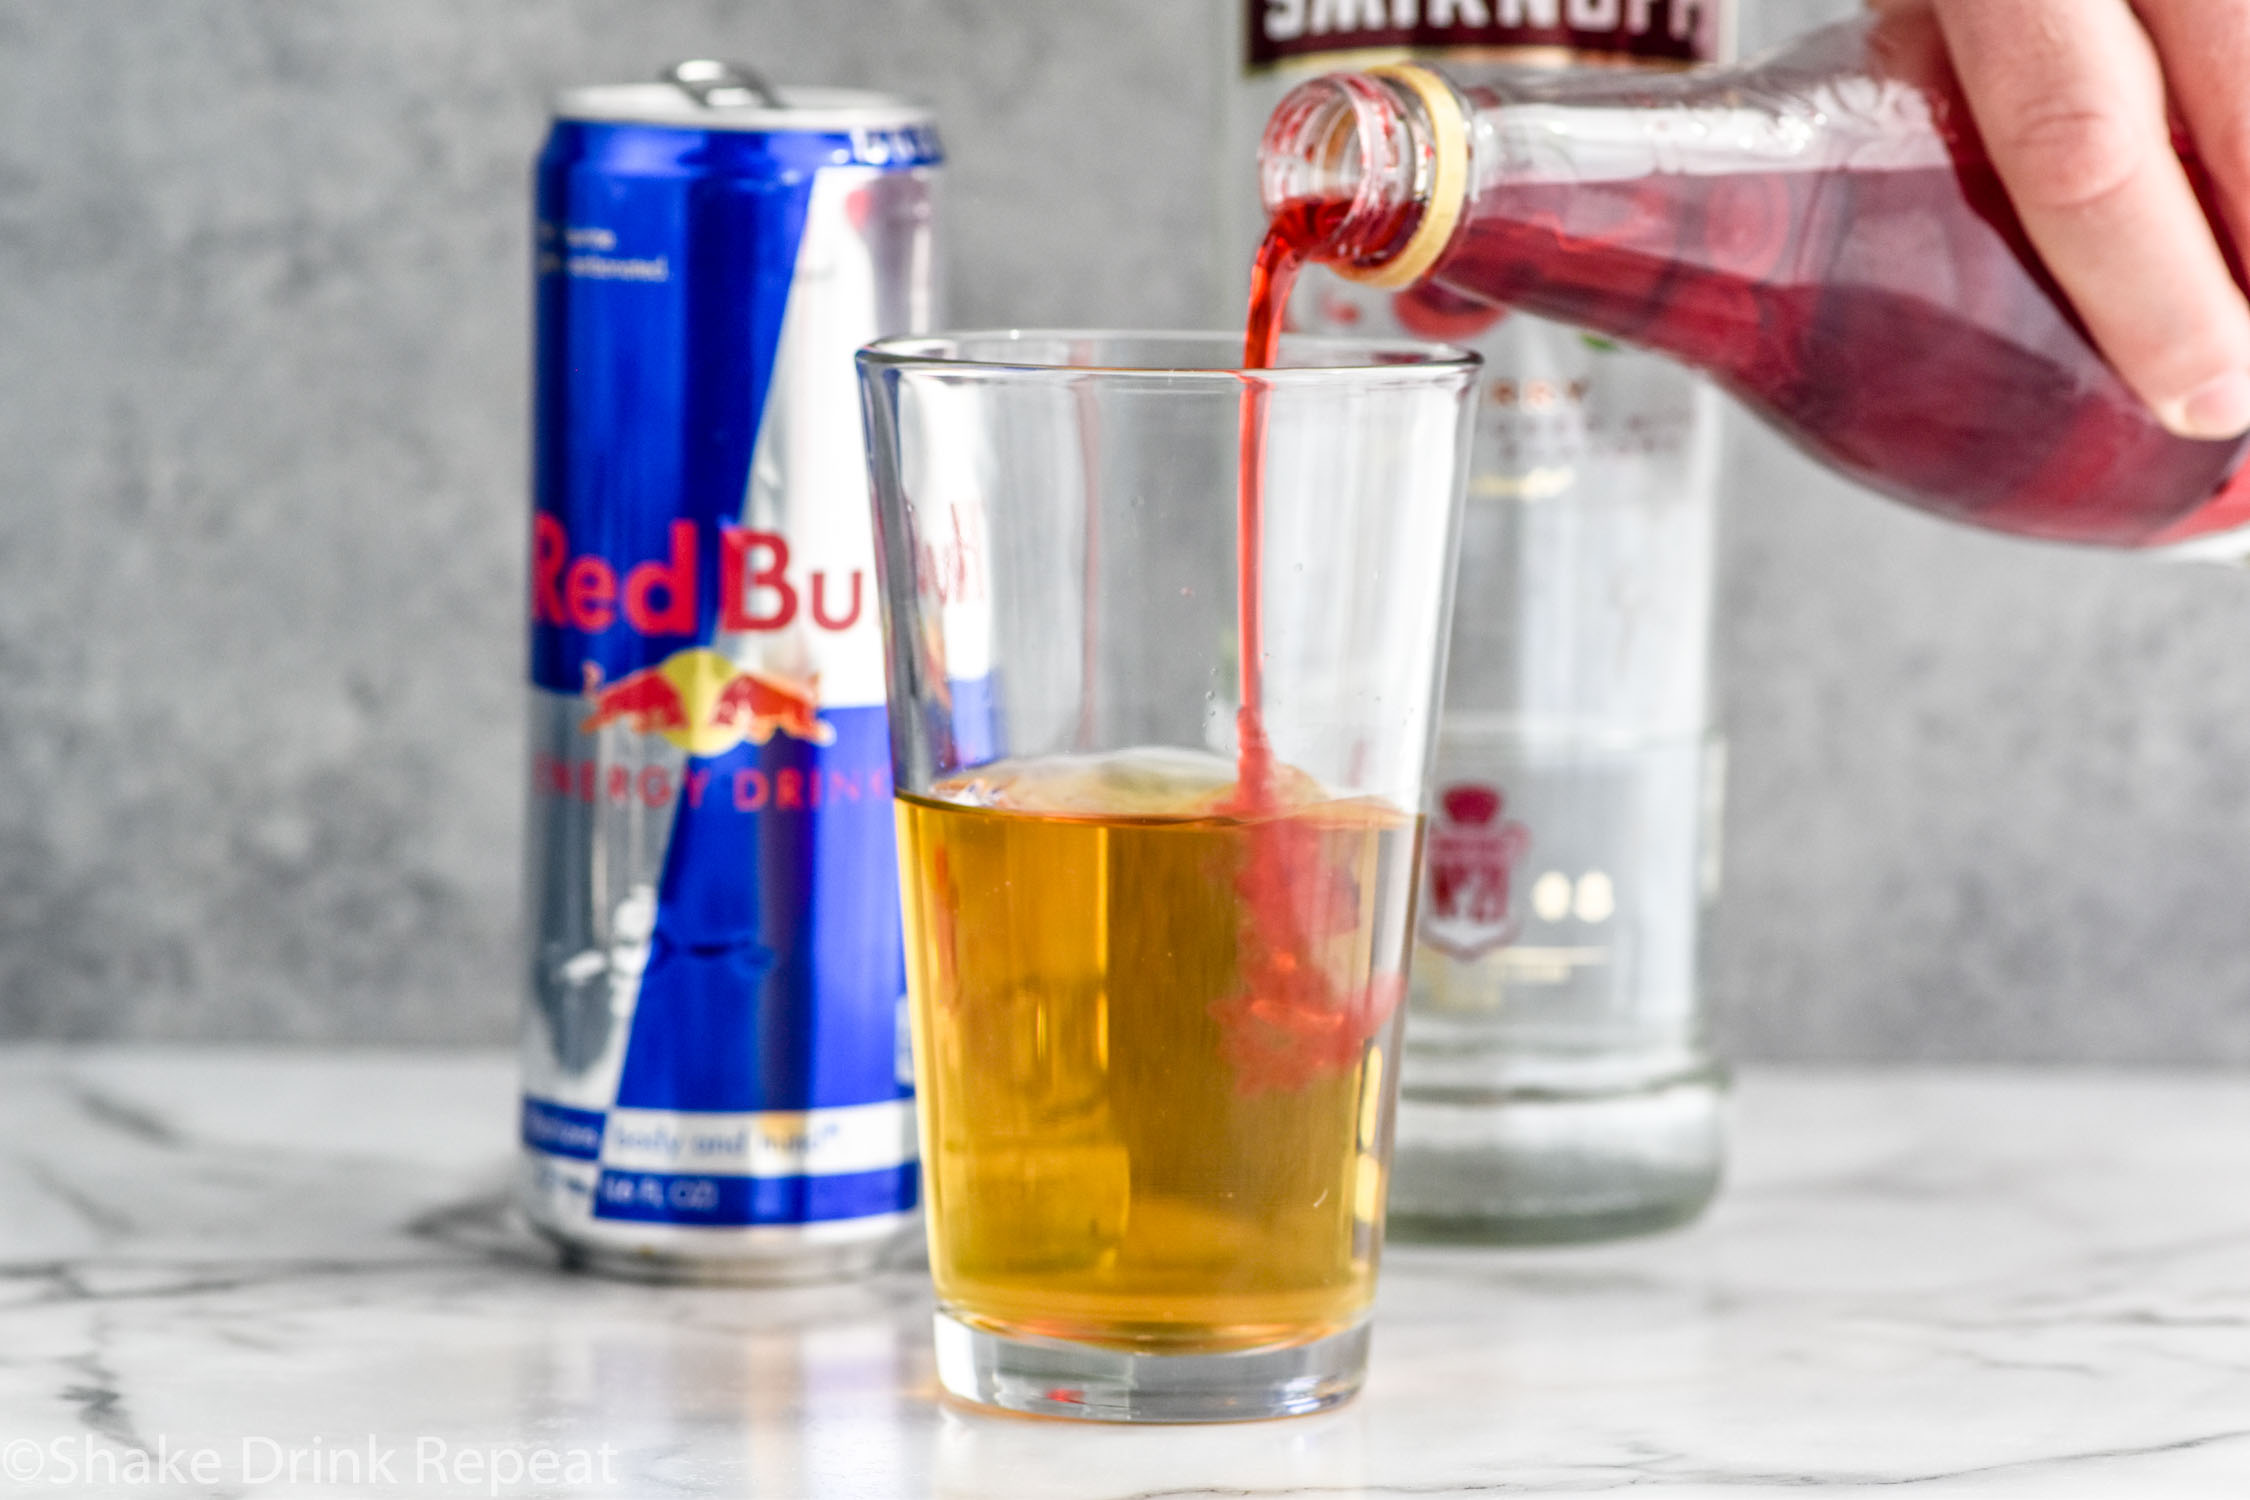 Side view of person's hand pouring grenadine into a pint glass with Red Bull for Cherry Bomb Shot recipe. Can of Red Bull and bottle of cherry vodka in the background.